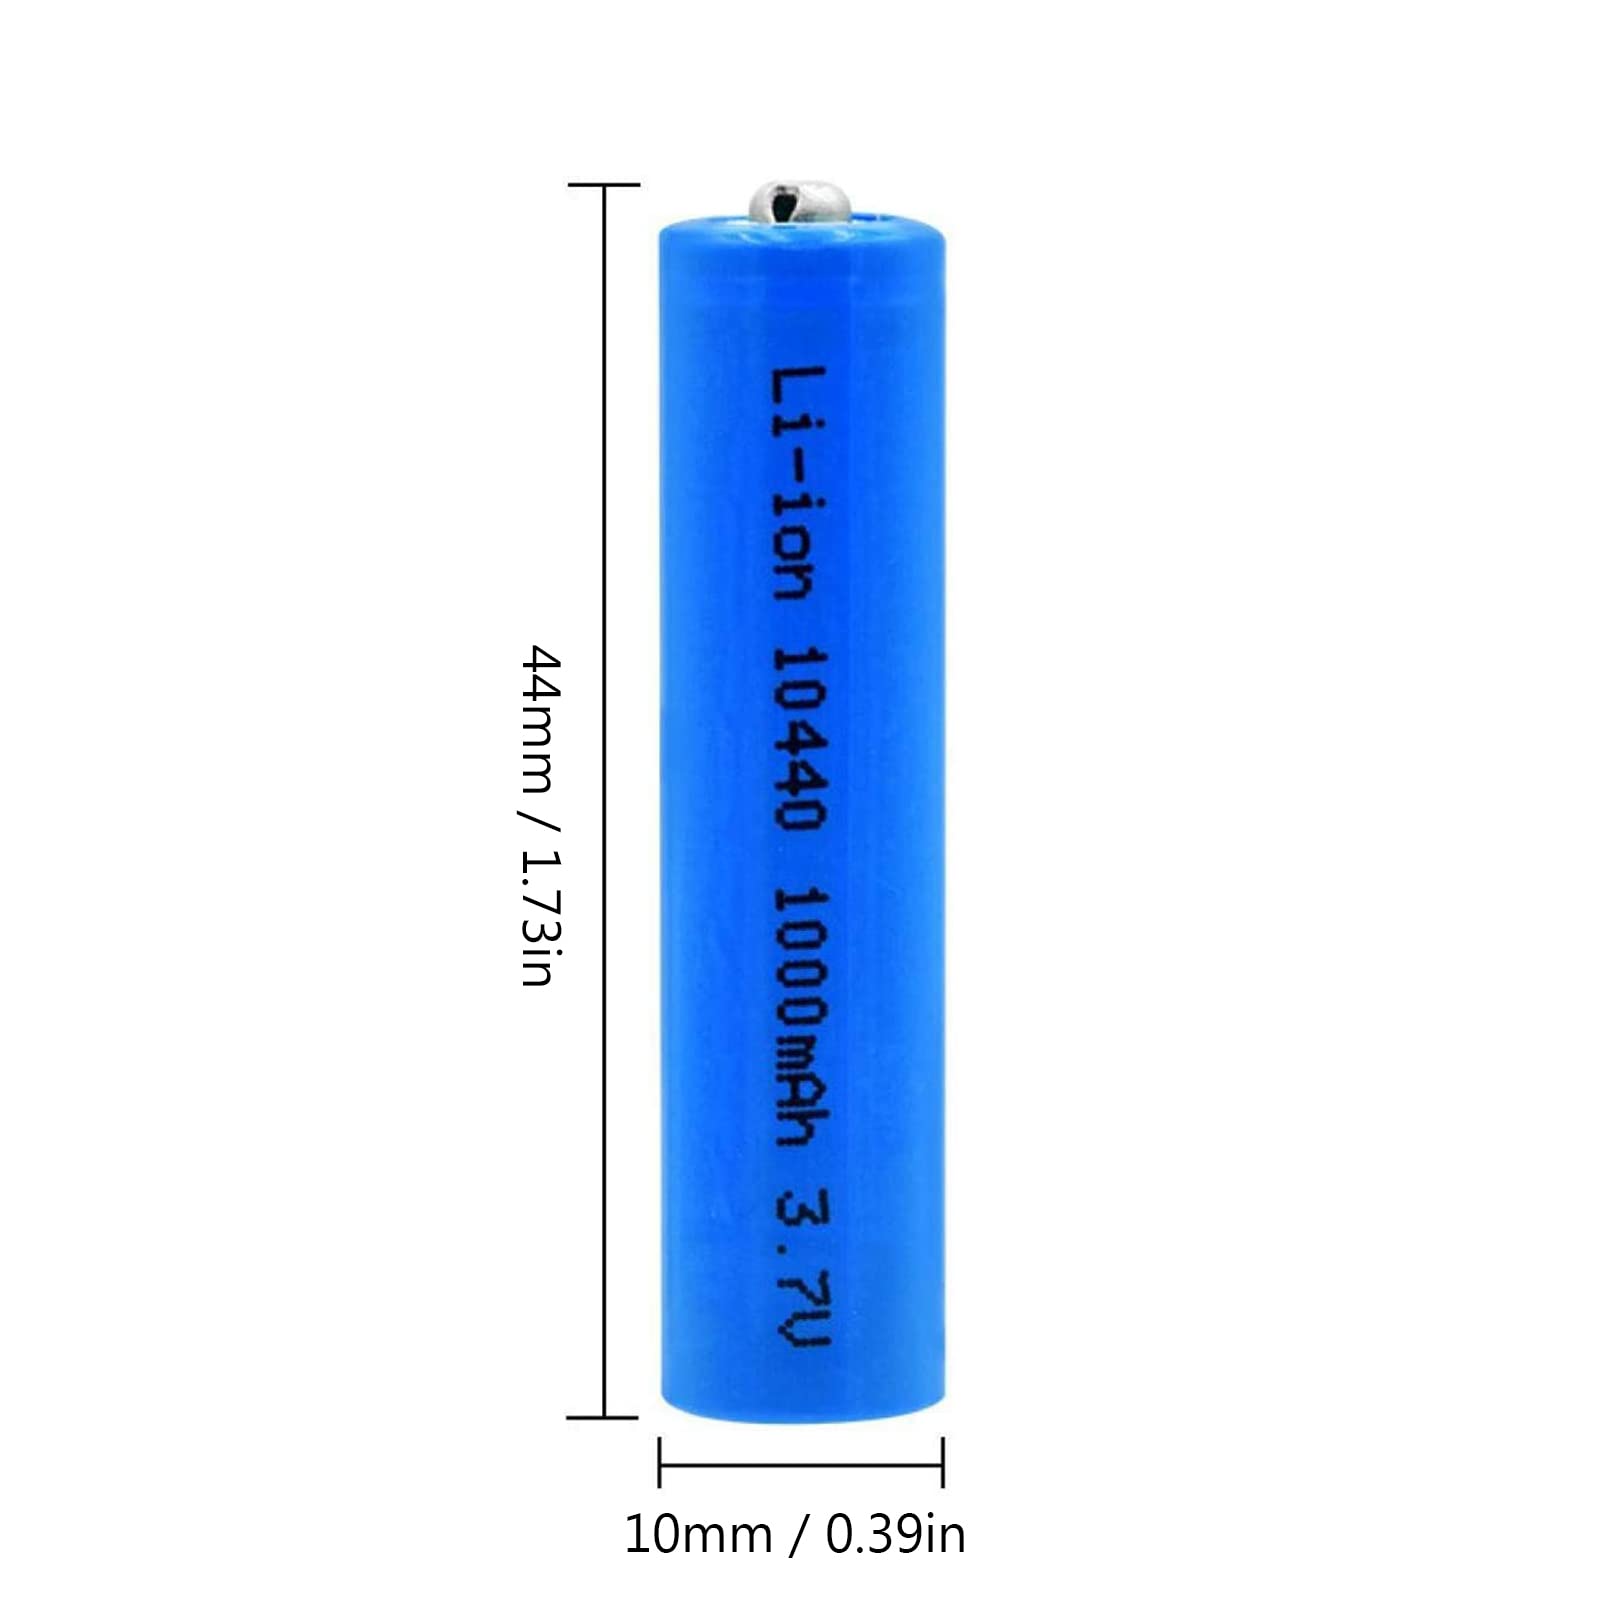 CSTAL High Performance Backup Battery, 3.7V 1000Mah Lithium Ion Replacement Battery, for Wireless Mouse Electric Razor, 2 Pcs